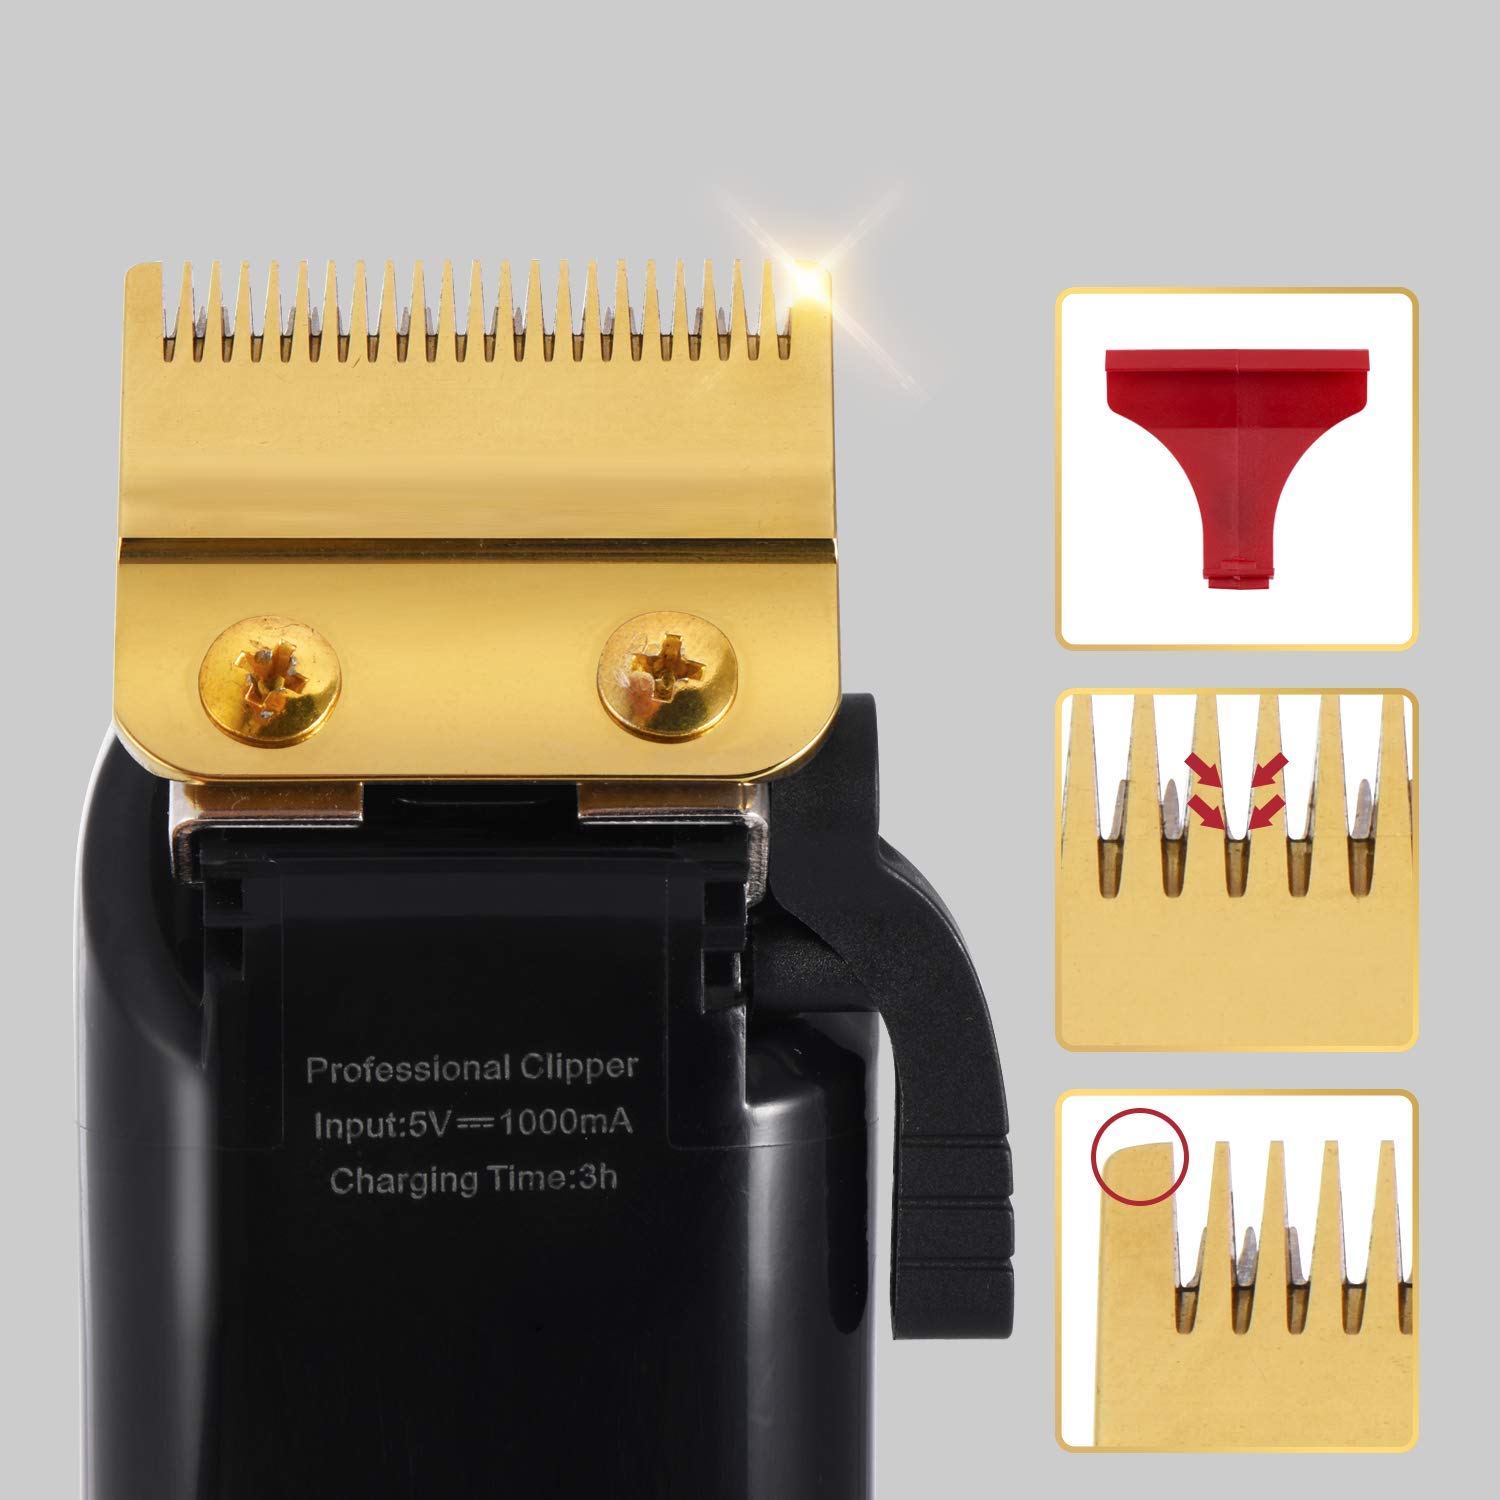 Professional Hair Clippers Cutting Kit 2000mA - 1